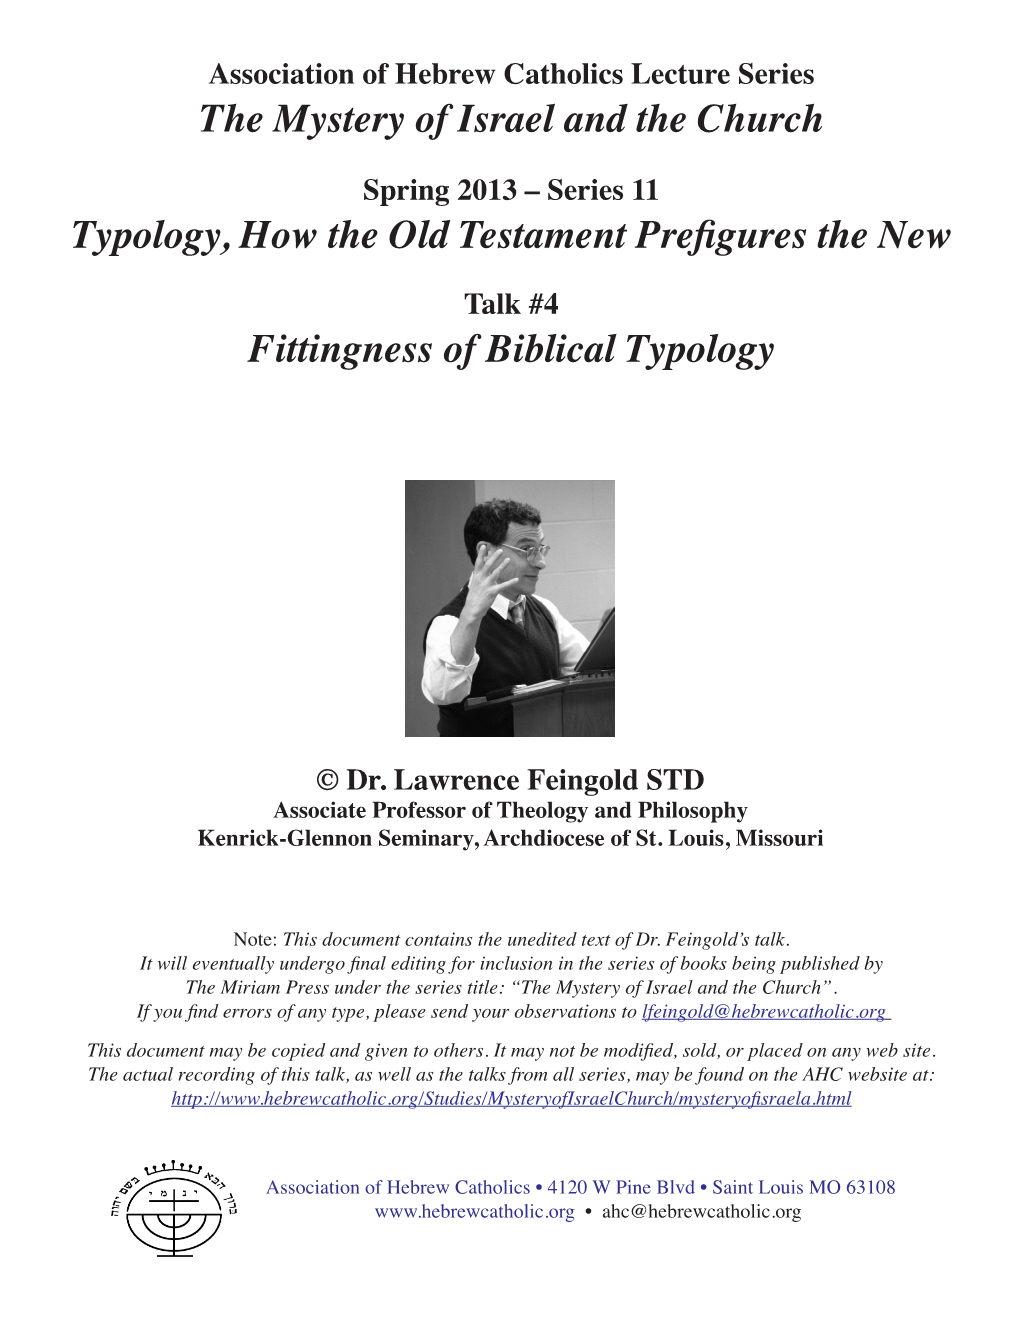 Typology, How the Old Testament Prefigures the New Fittingness Of